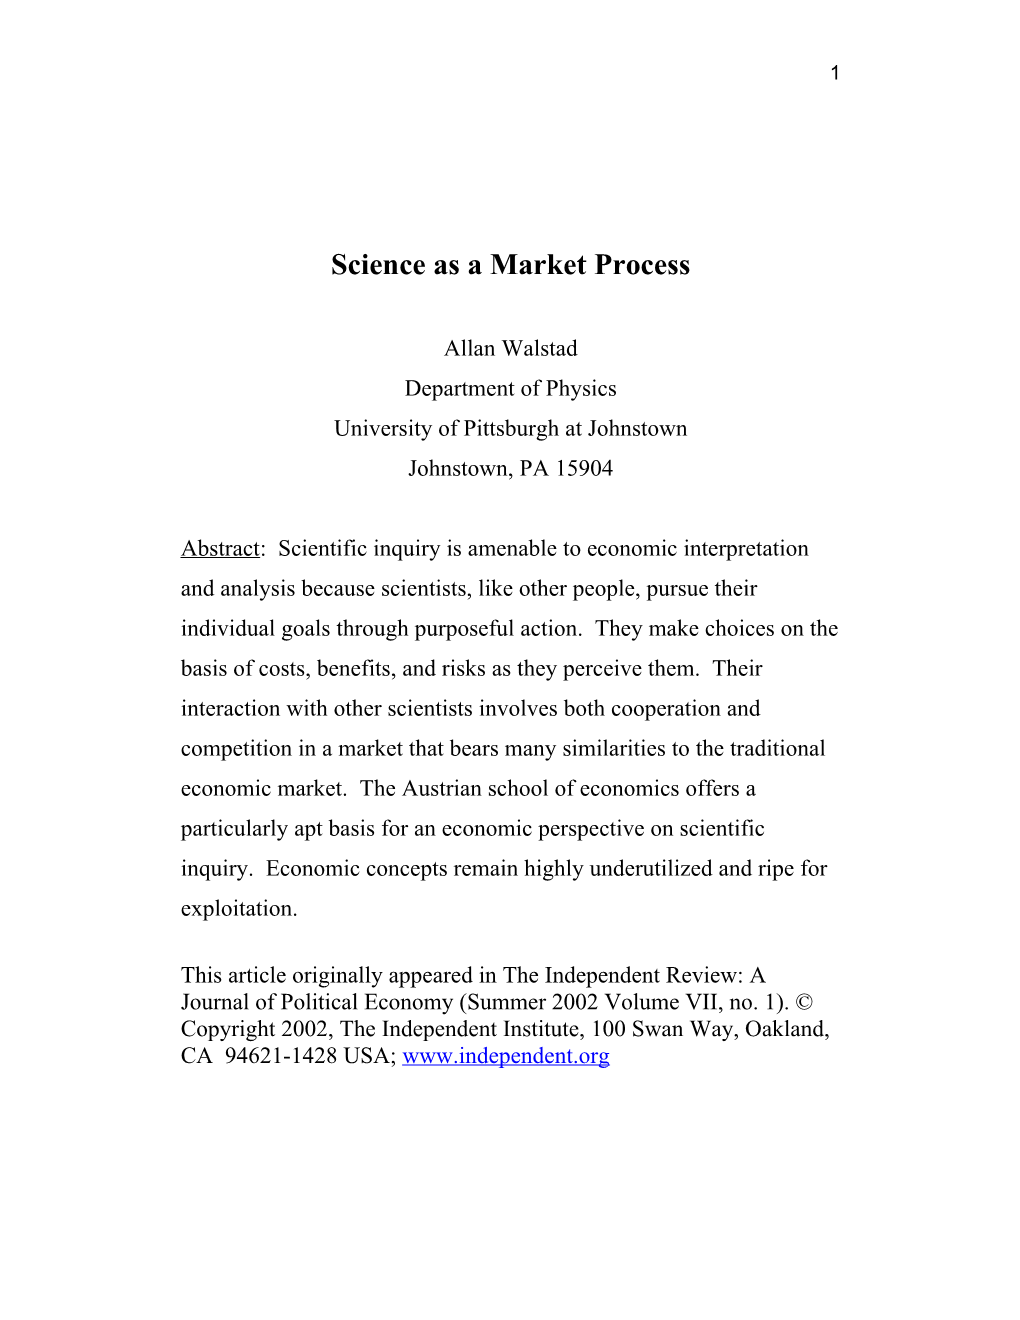 Science As a Market Process